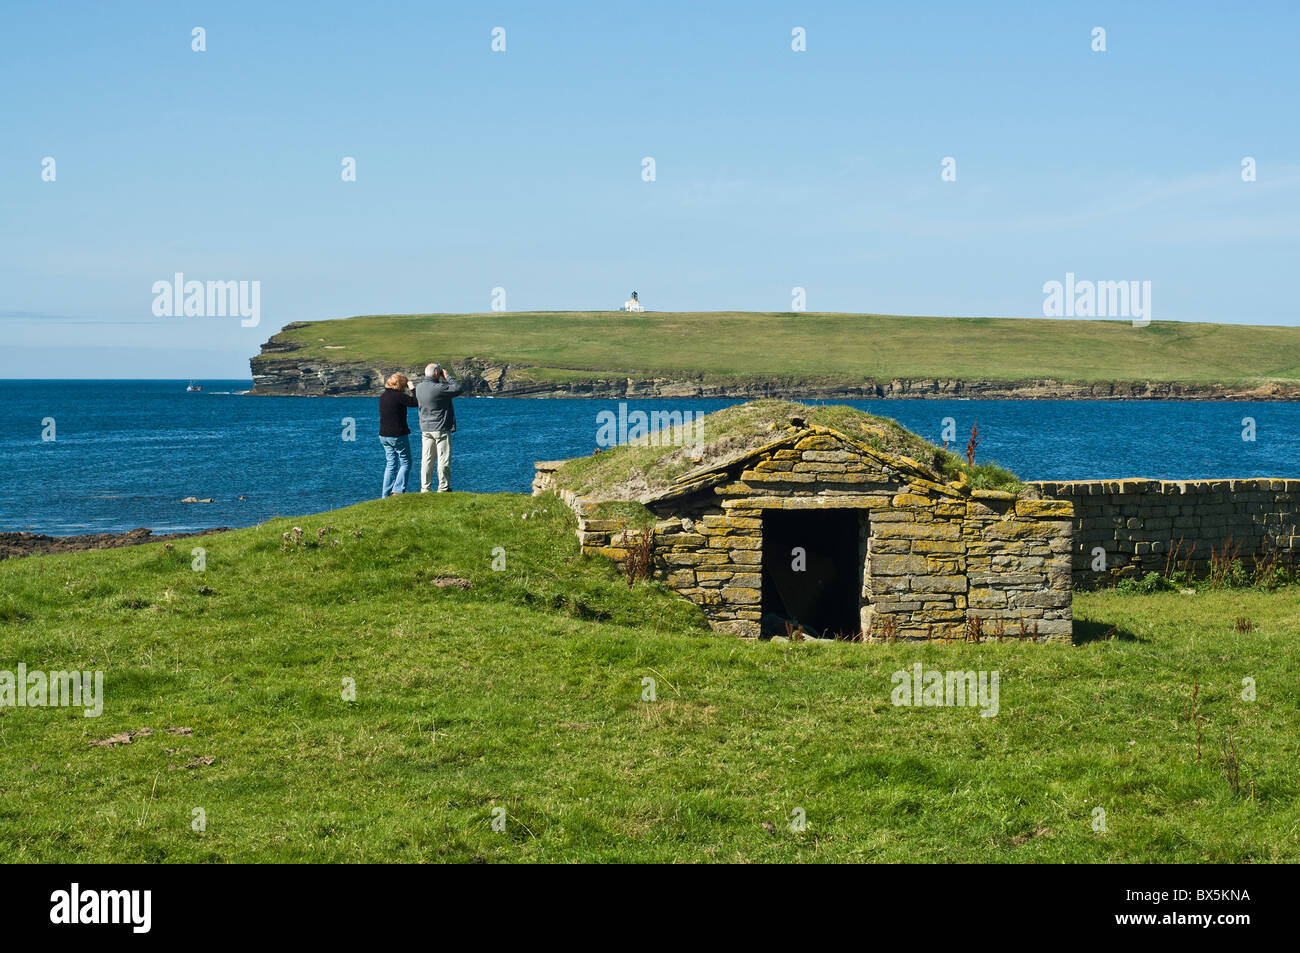 dh Brough of Birsay BIRSAY ORKNEY Couple tourist visitors looking binoculars at seabirds Bay of Birsay Stock Photo